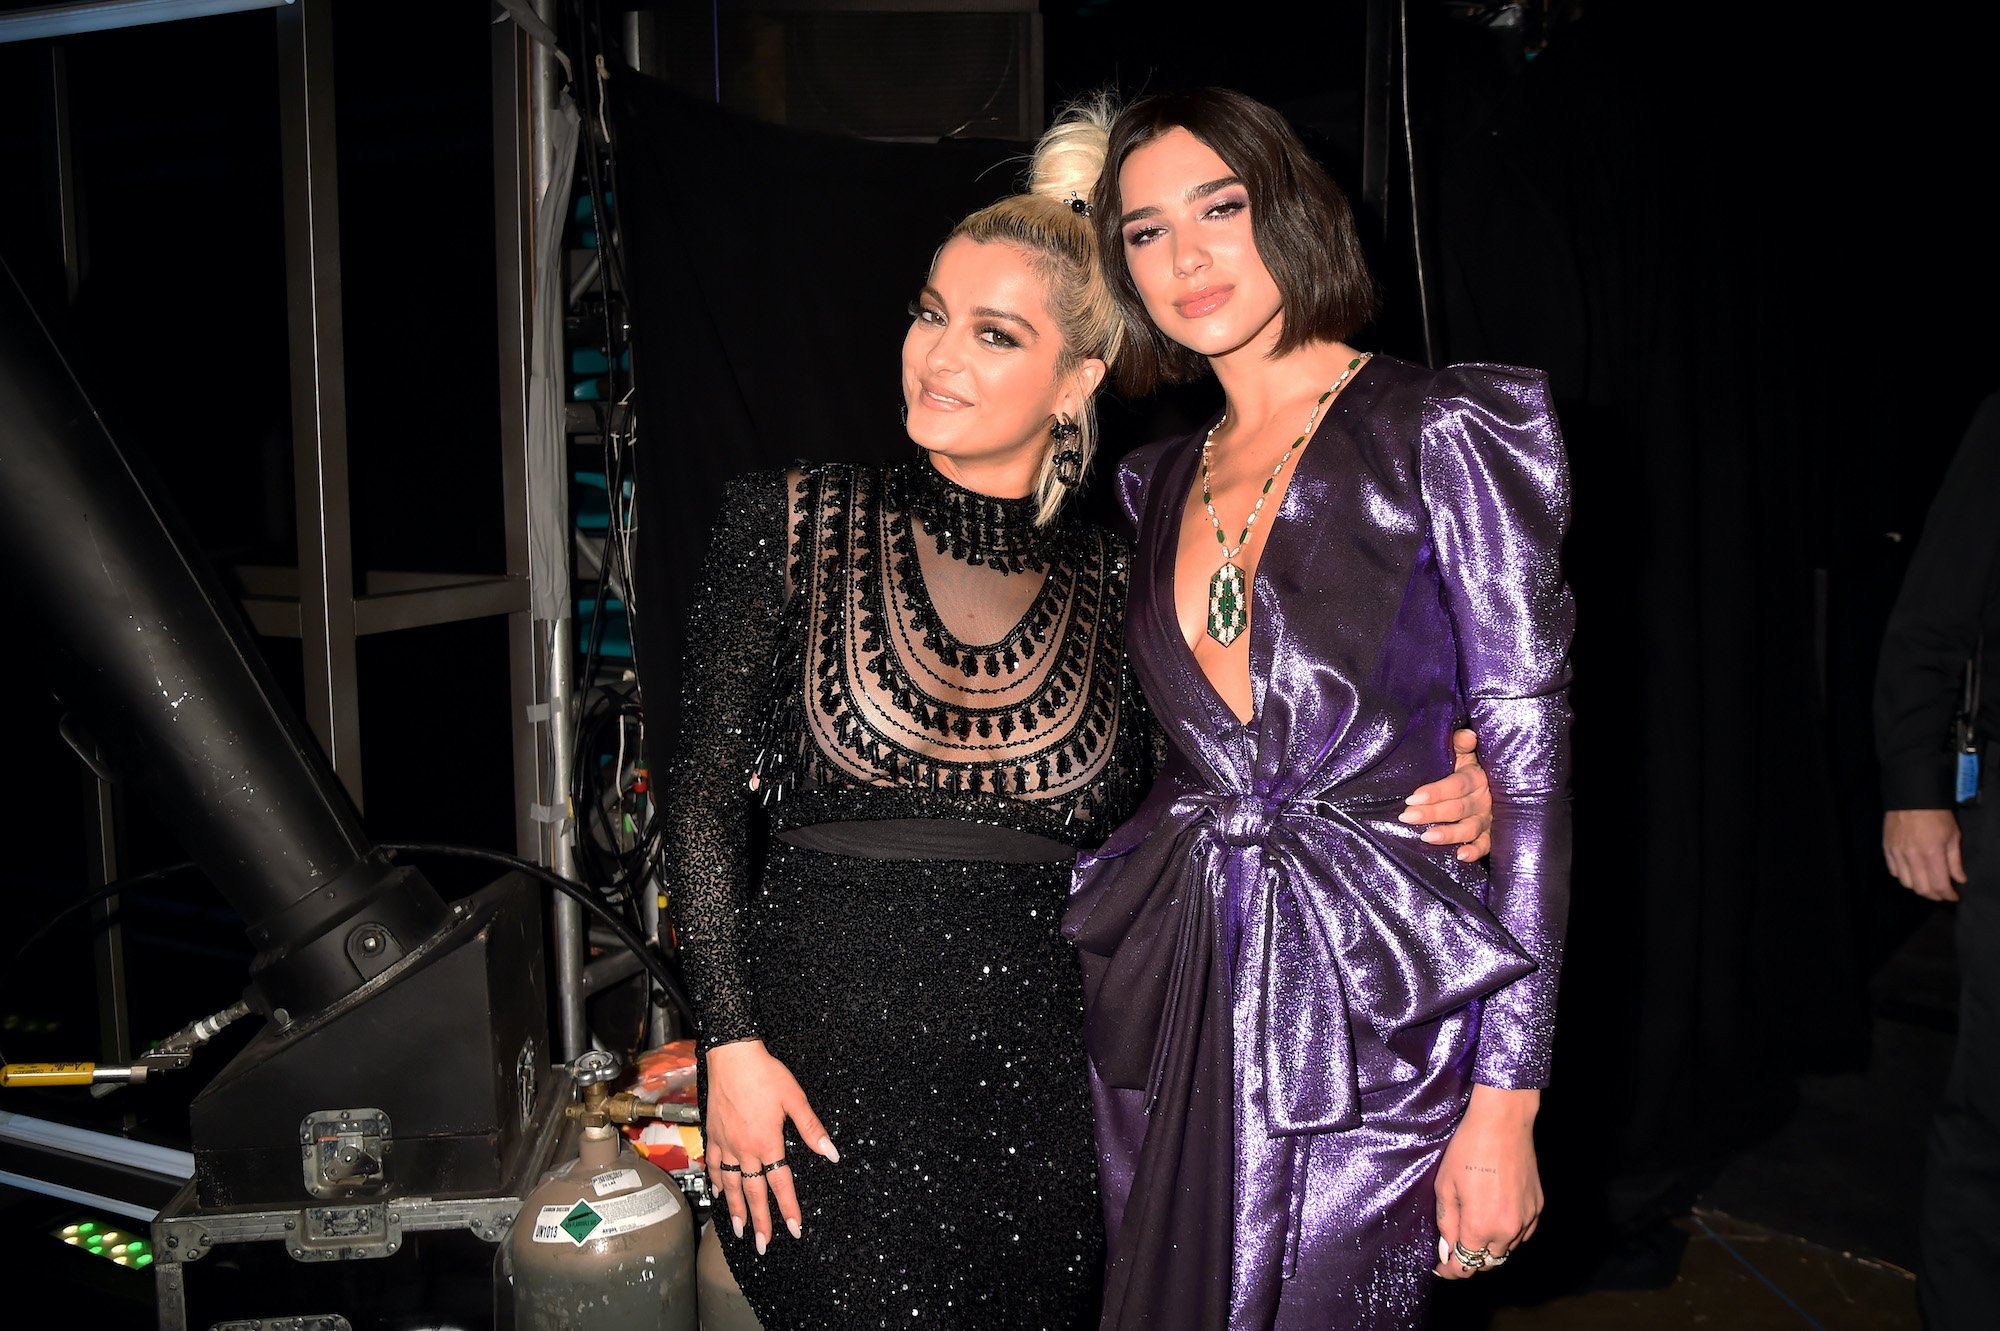 (L-R) Bebe Rexha and Dua Lipa, embracing, in the wings of a stade